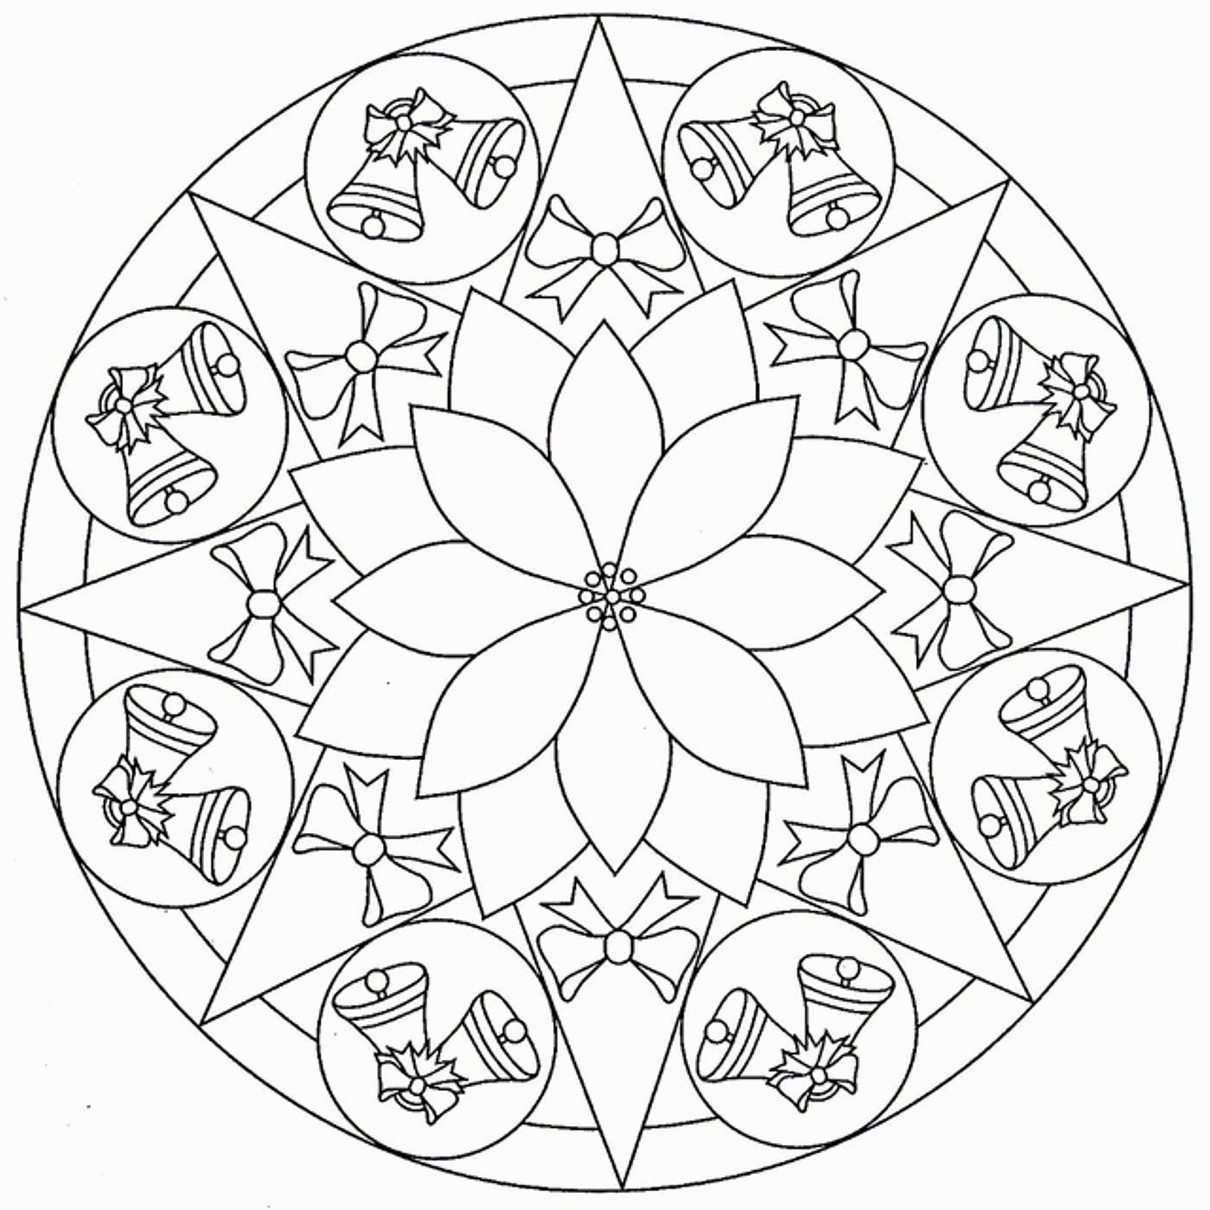 Mandala Coloring Pages For Boys
 Christmas Mandala Coloring Pages to and print for